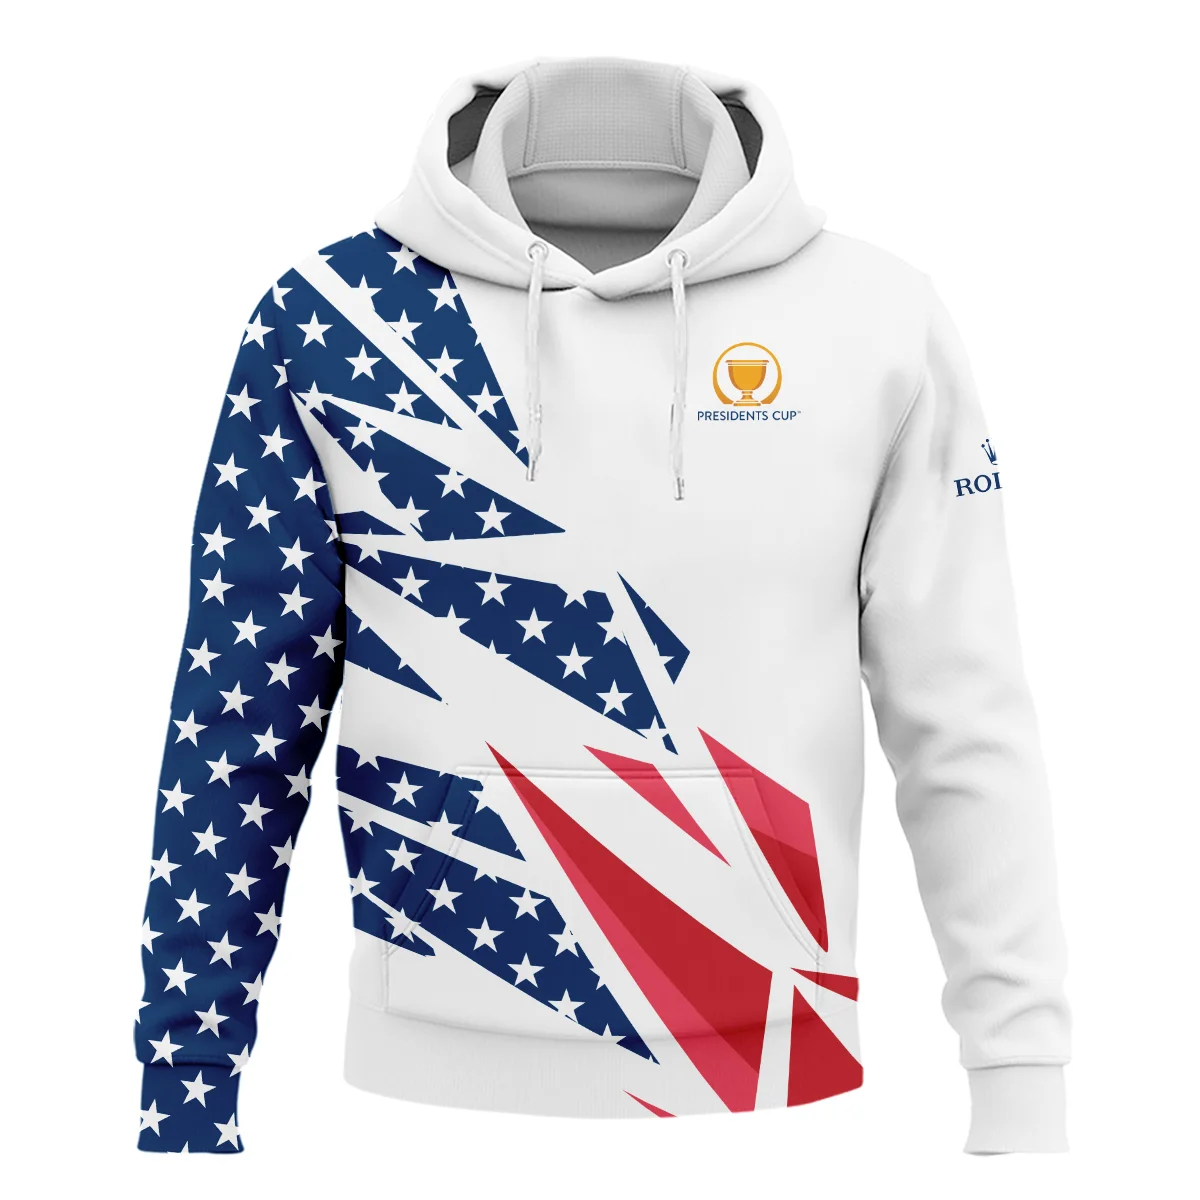 Flag American Cup Presidents Cup Rolex Hoodie Shirt All Over Prints QTPR2606A1ROXHD